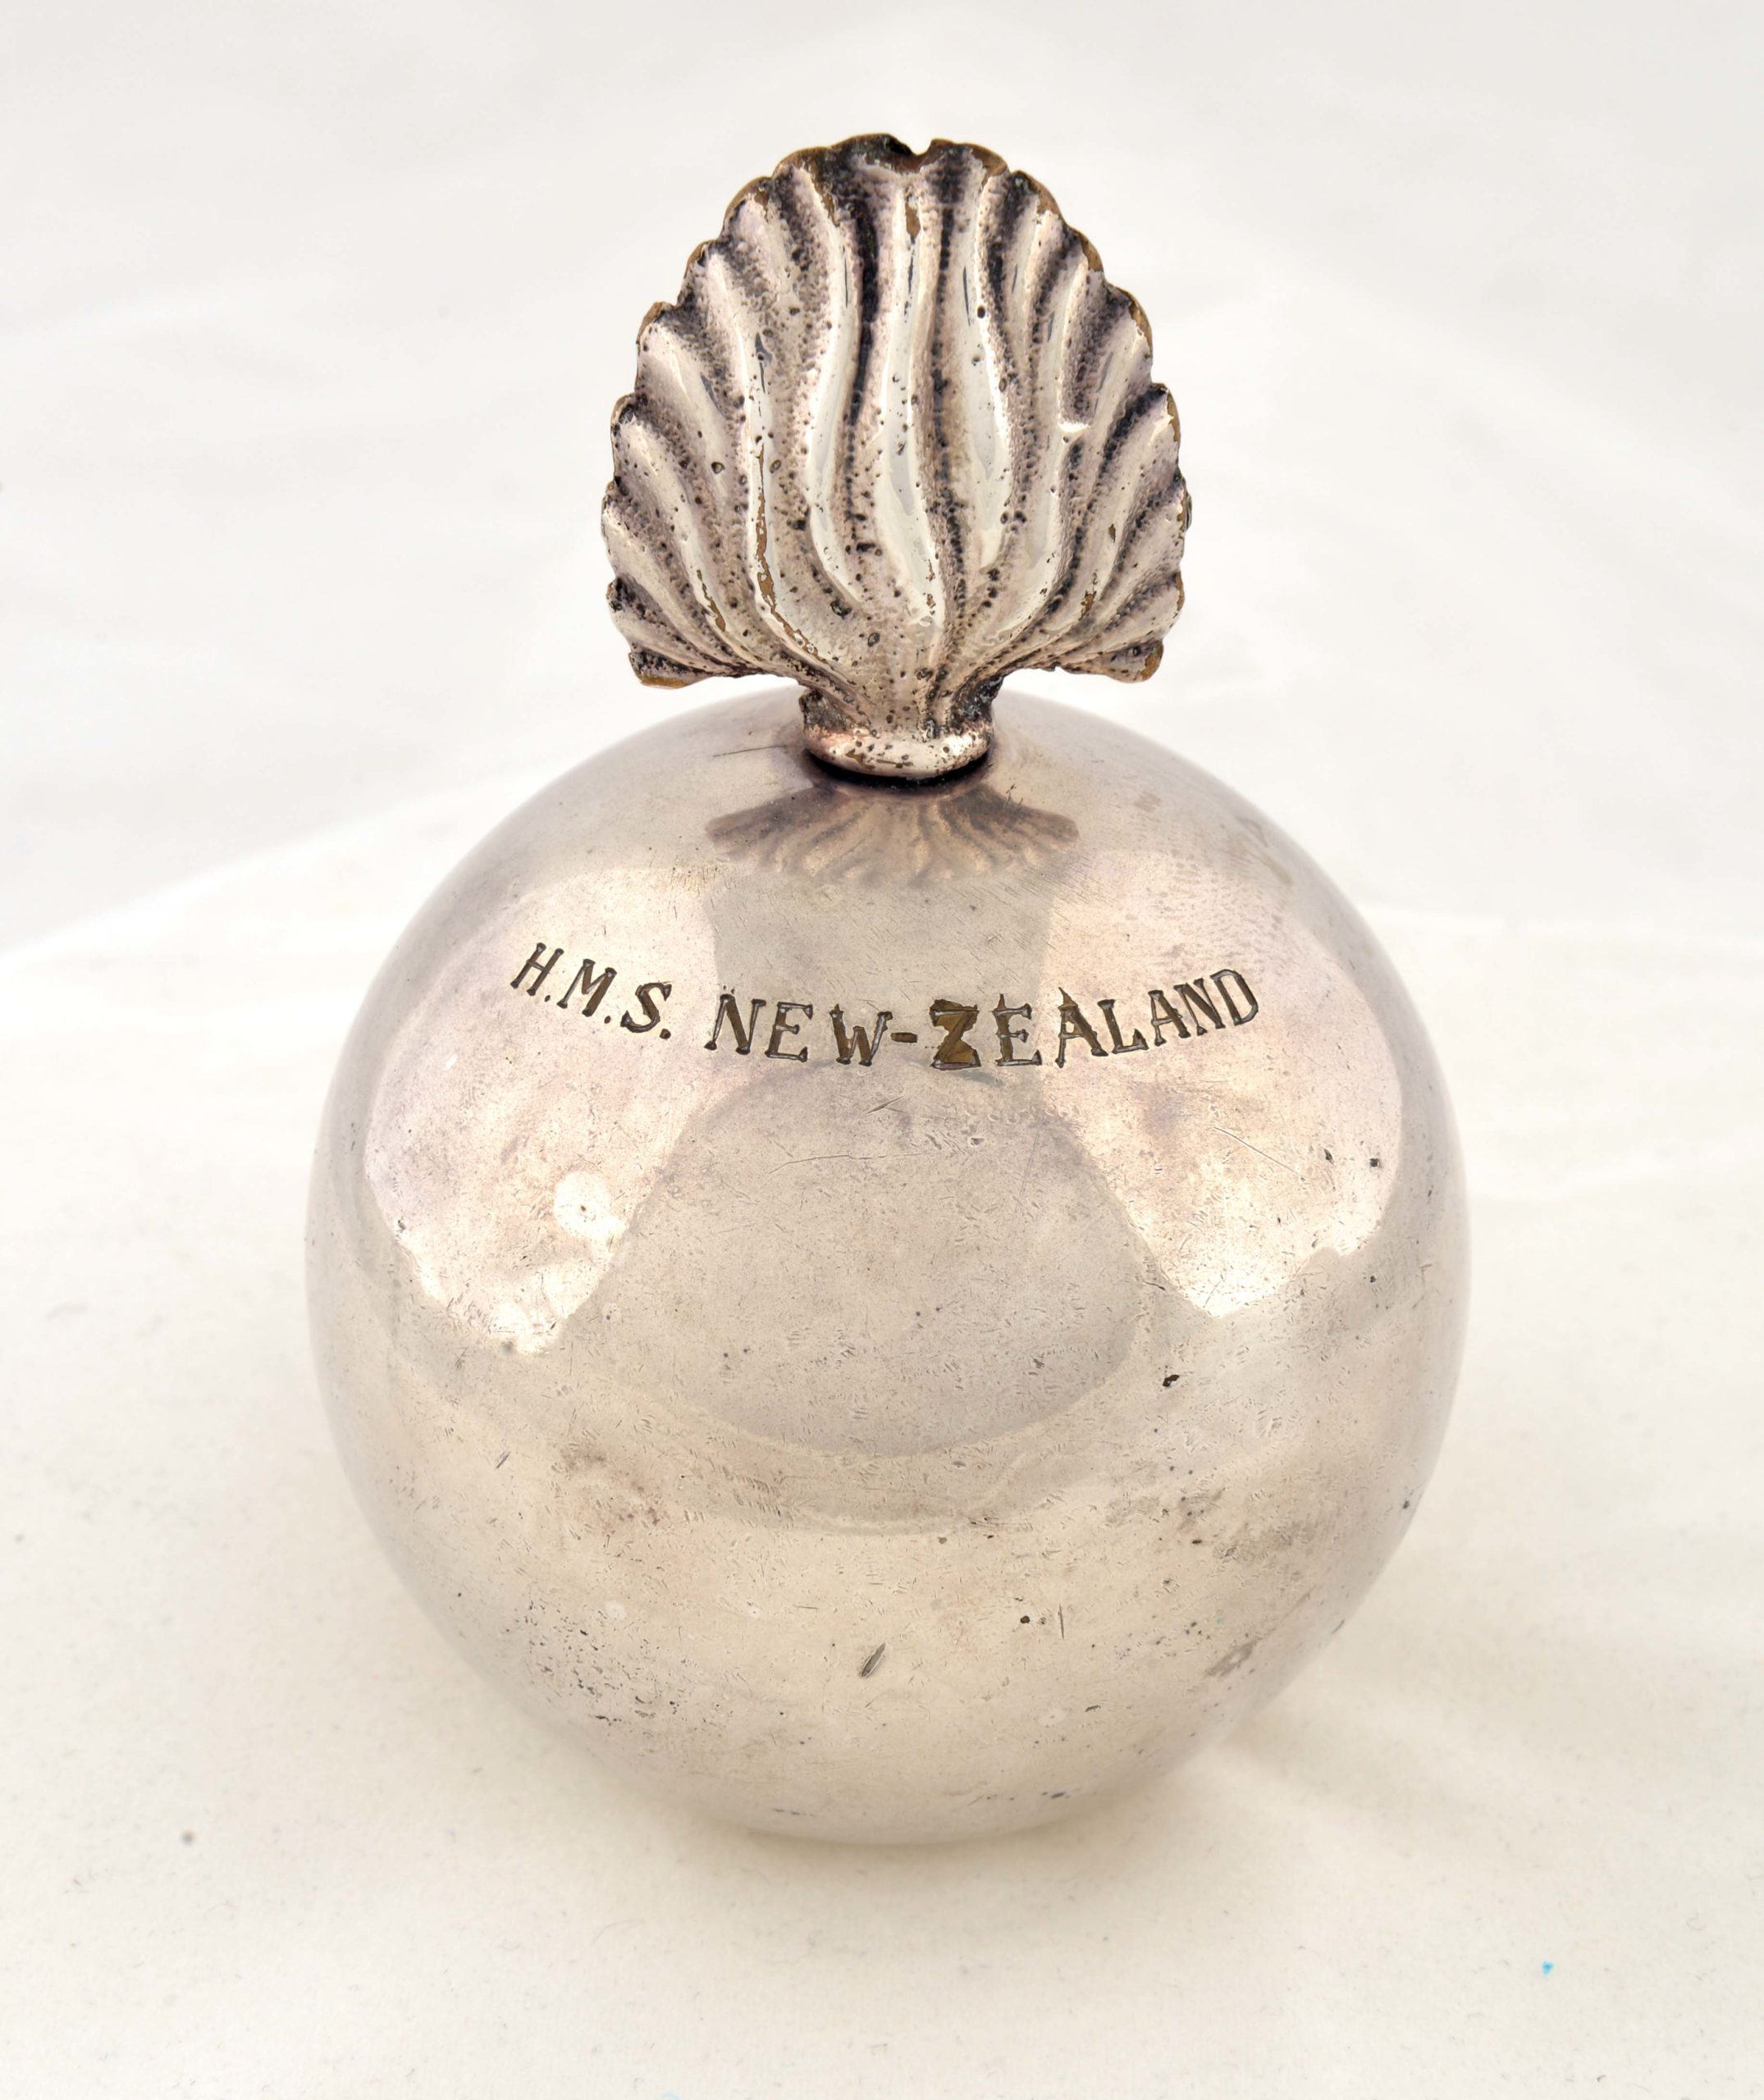 Silver lighter shaped like a grenade. Engraved are the words ‘HMS NEW ZEALAND‘.